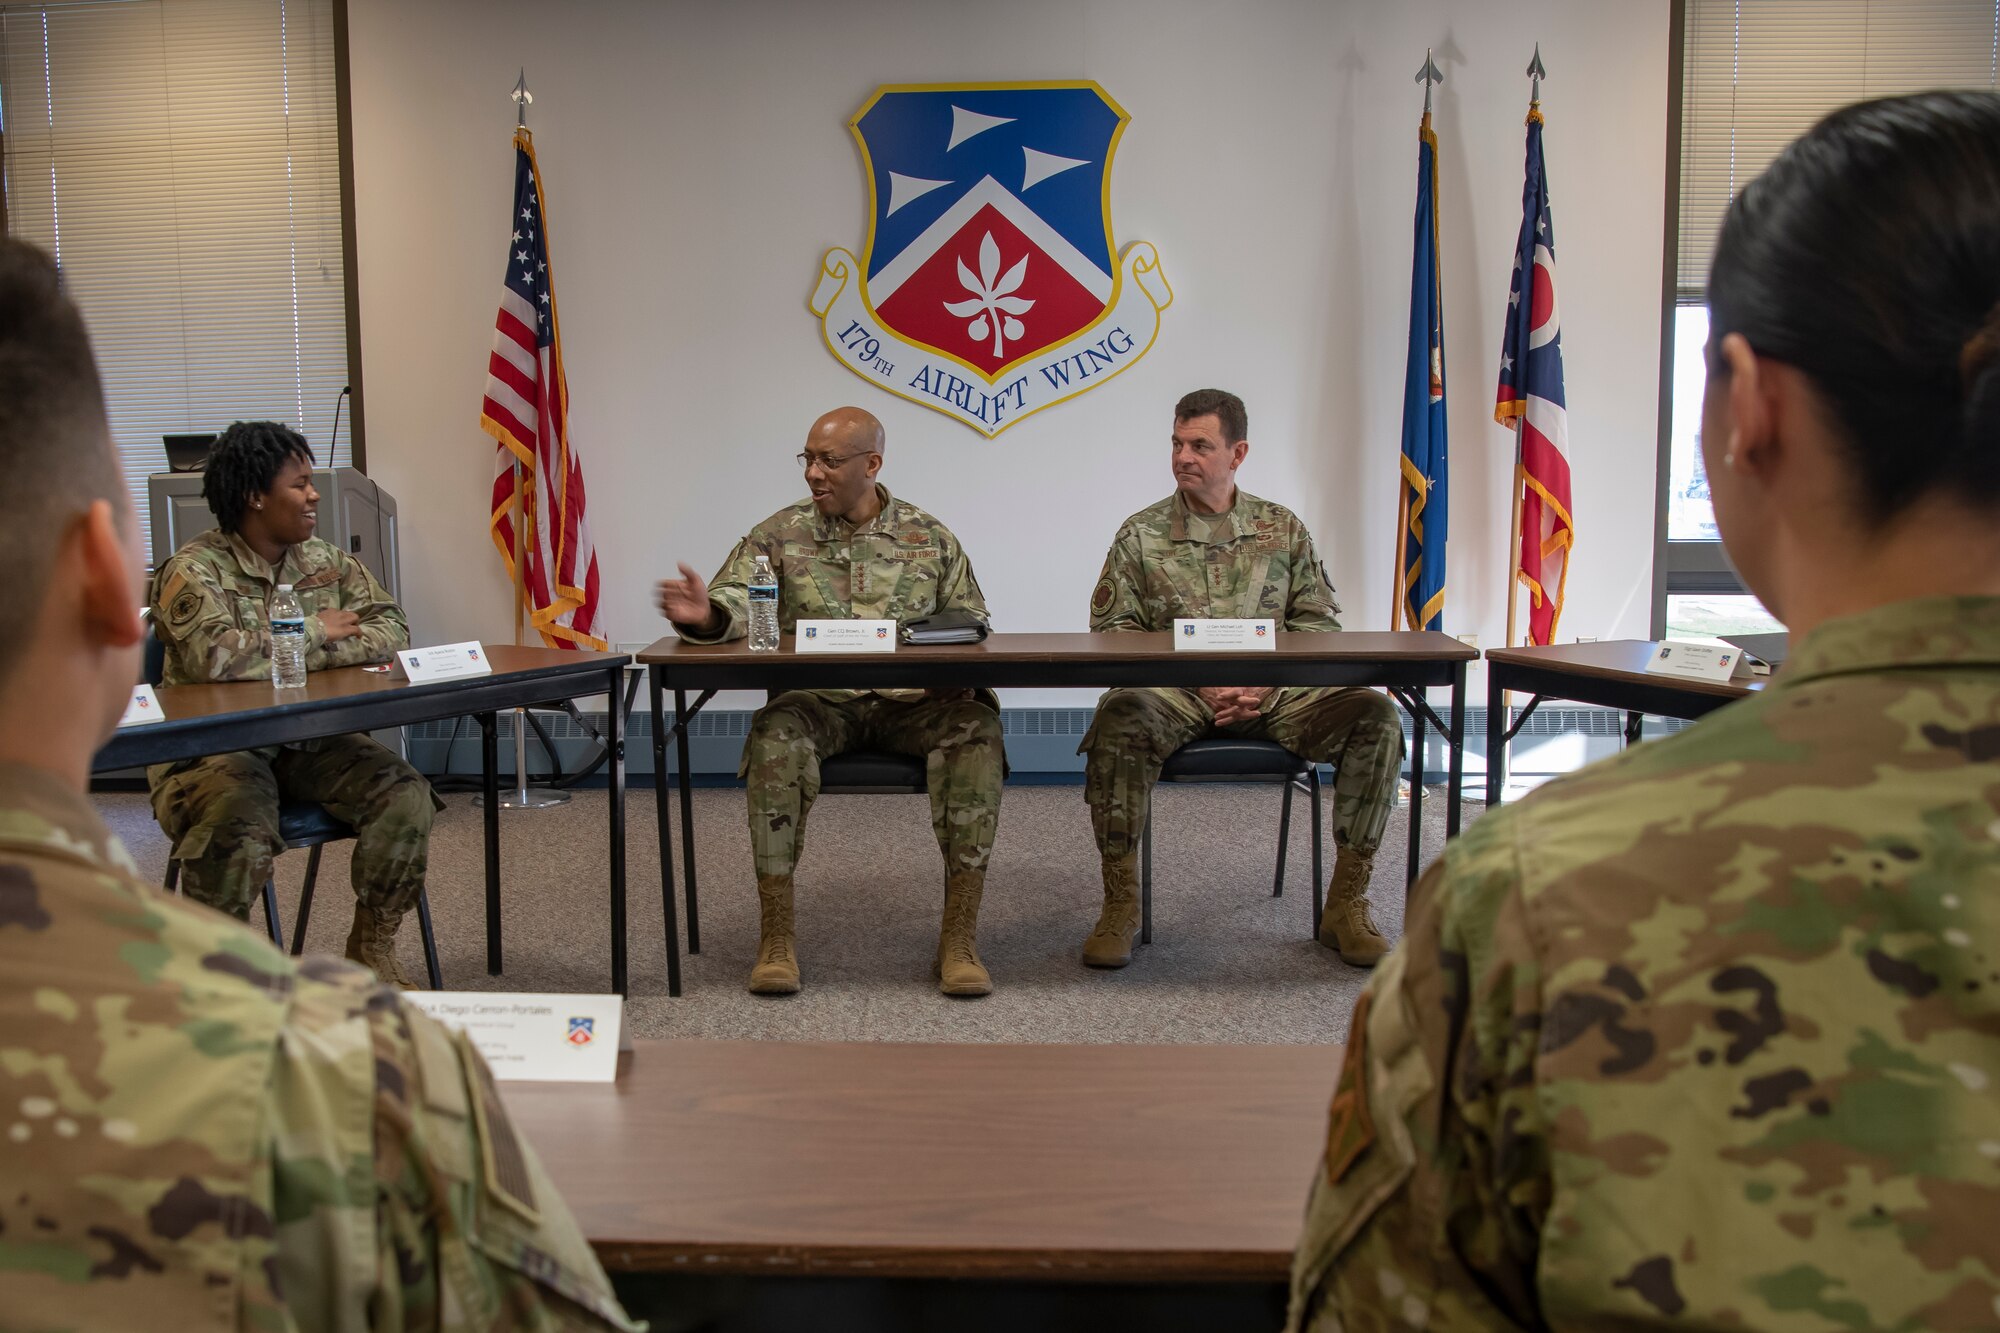 U.S. Air Force Chief of Staff Gen. CQ Brown, Jr., takes questions from Airmen during a visit to the 179th Airlift Wing at Mansfield Lahm Air National Guard Base, Ohio, Apr. 2, 2023.